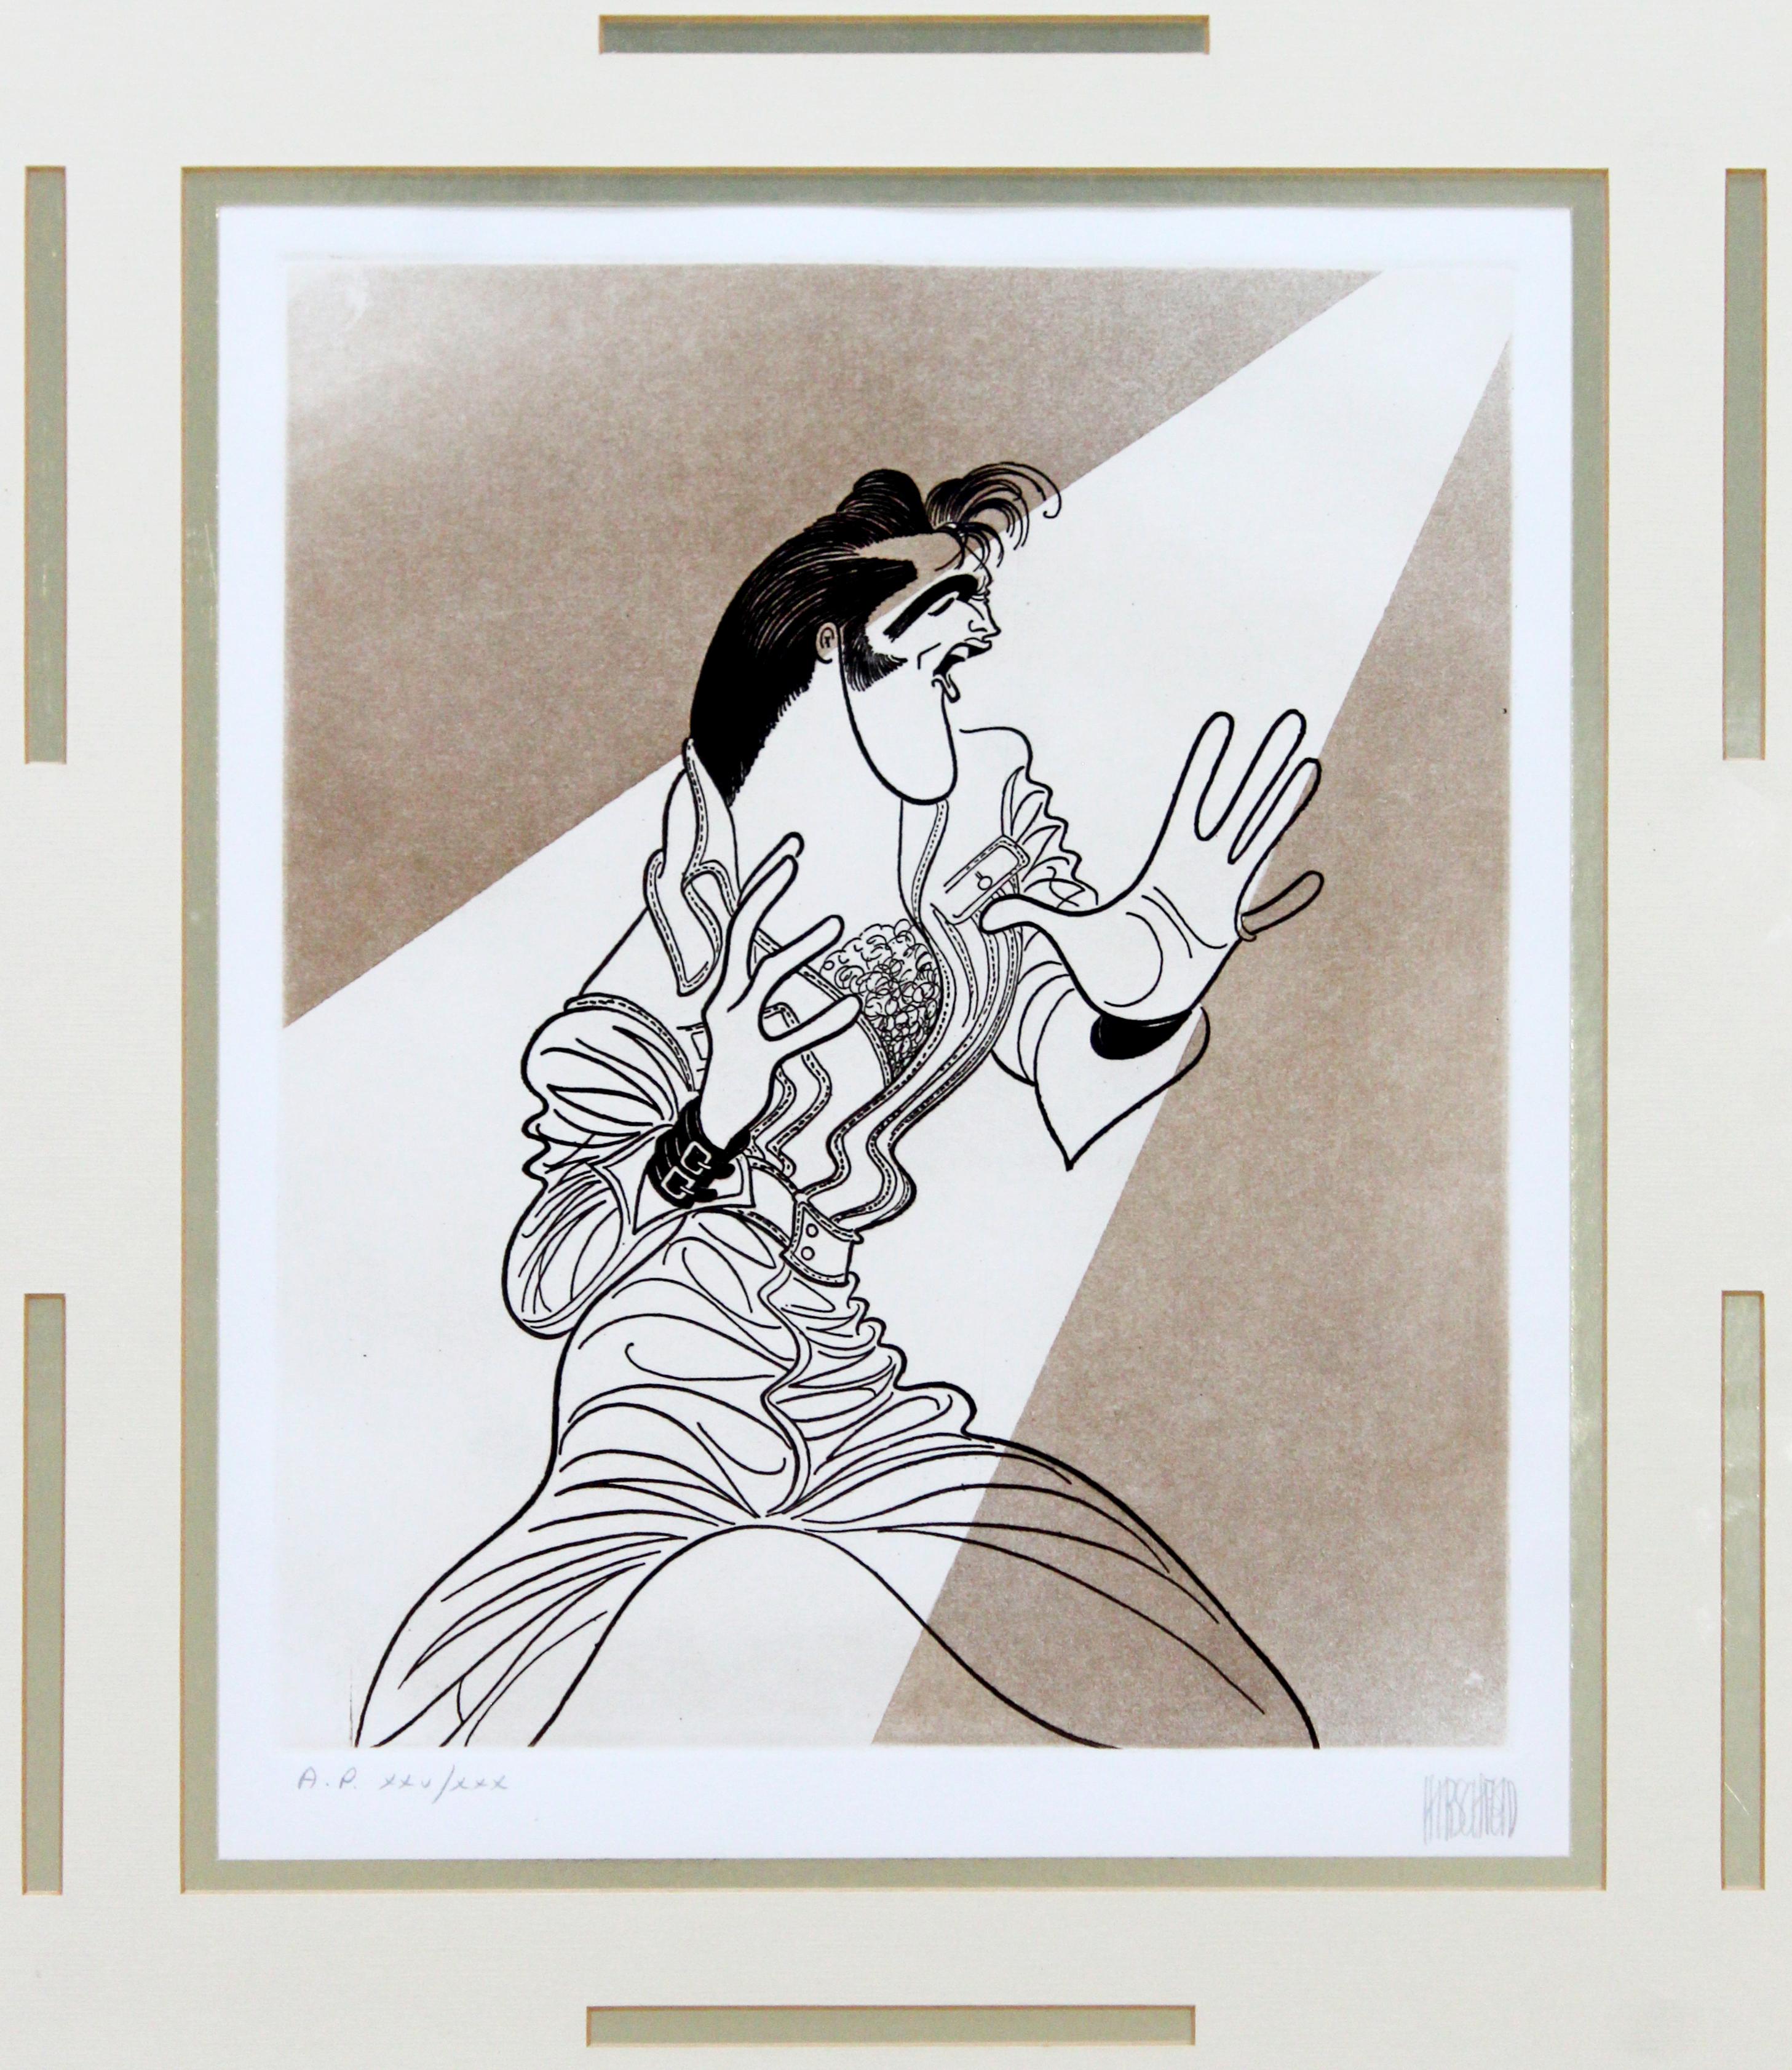 For your consideration is a framed, Elvis etching, signed and numbered by Al Hirschfield, A.P. 25/30. In excellent condition. The dimensions of the frame are 17